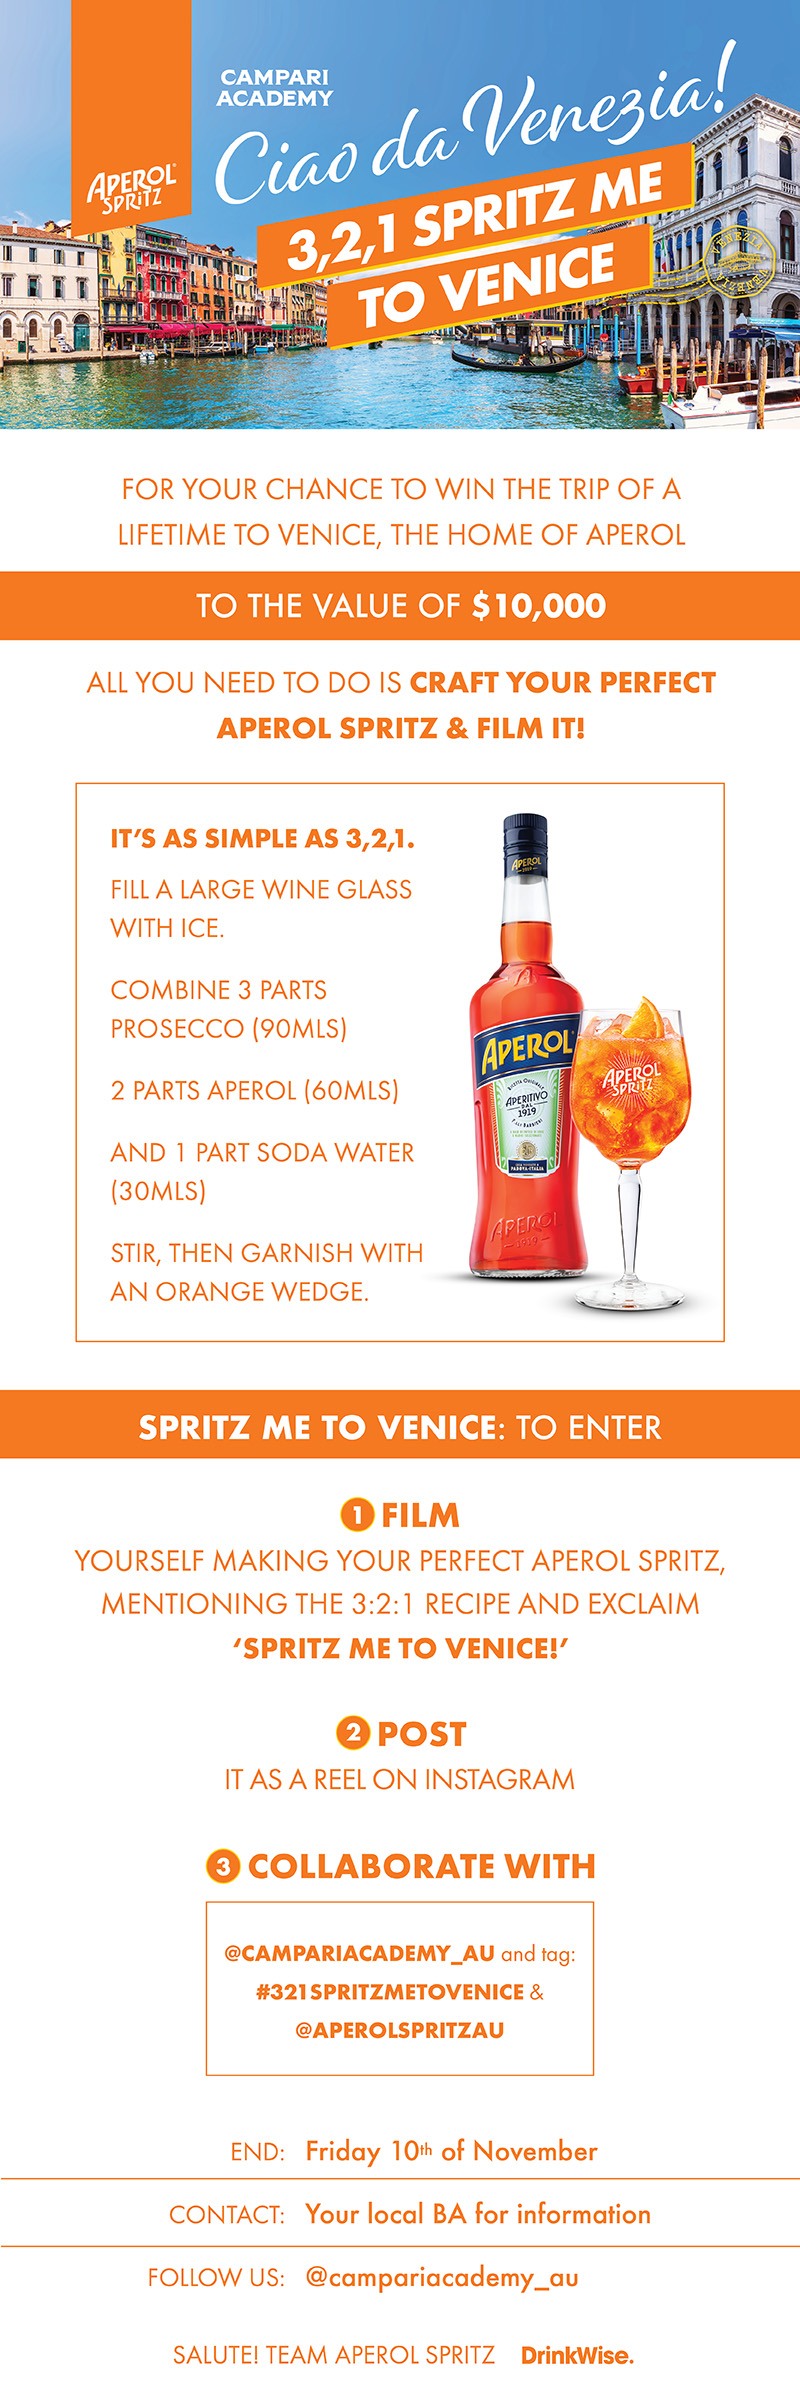 3,2,1 SPRITZ ME TO VENICE! For your chance to win the trip of a lifetime, to the value of $10,000, all you need to do is craft your perfect Aperol Spritz and film it!